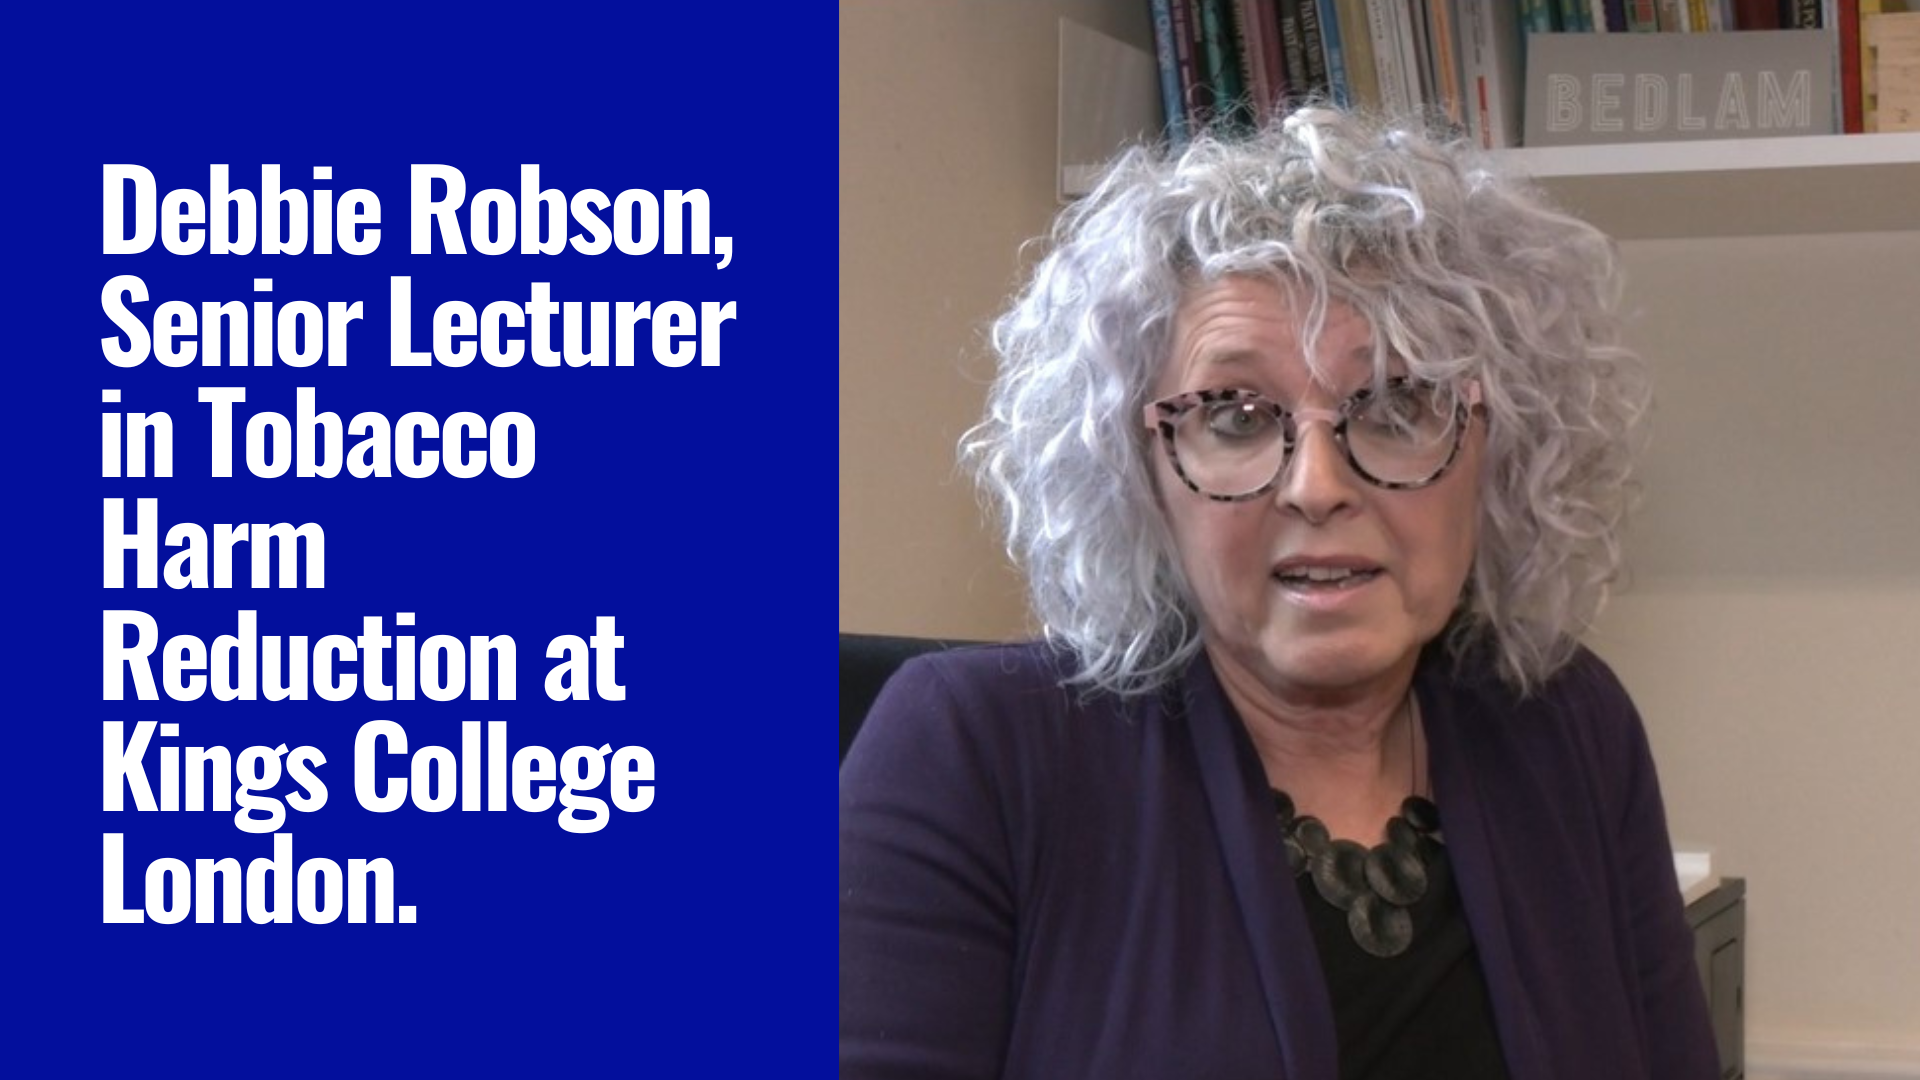 Debbie Robson, Senior Lecturer in Tobacco Harm Reduction at Kings College London